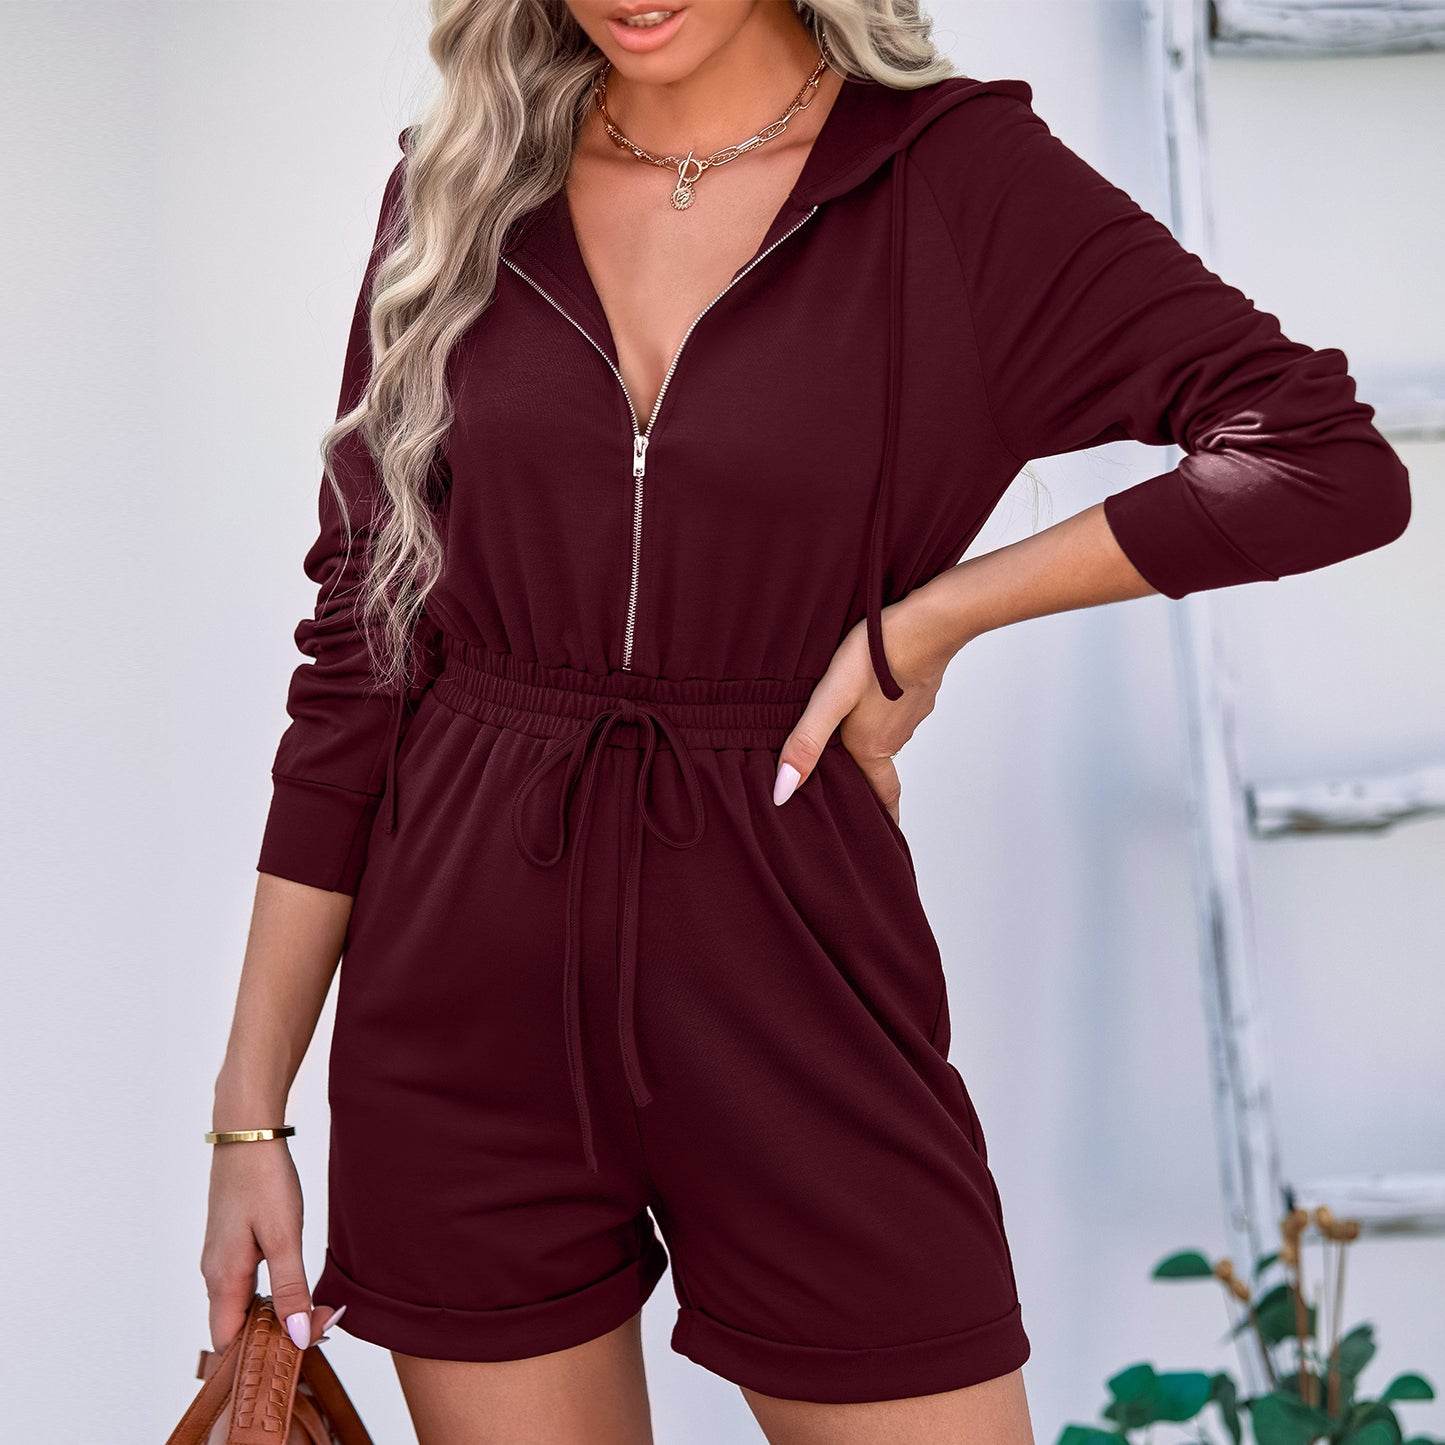 Women's Slim Fit Hooded Long-sleeve One-piece Shorts